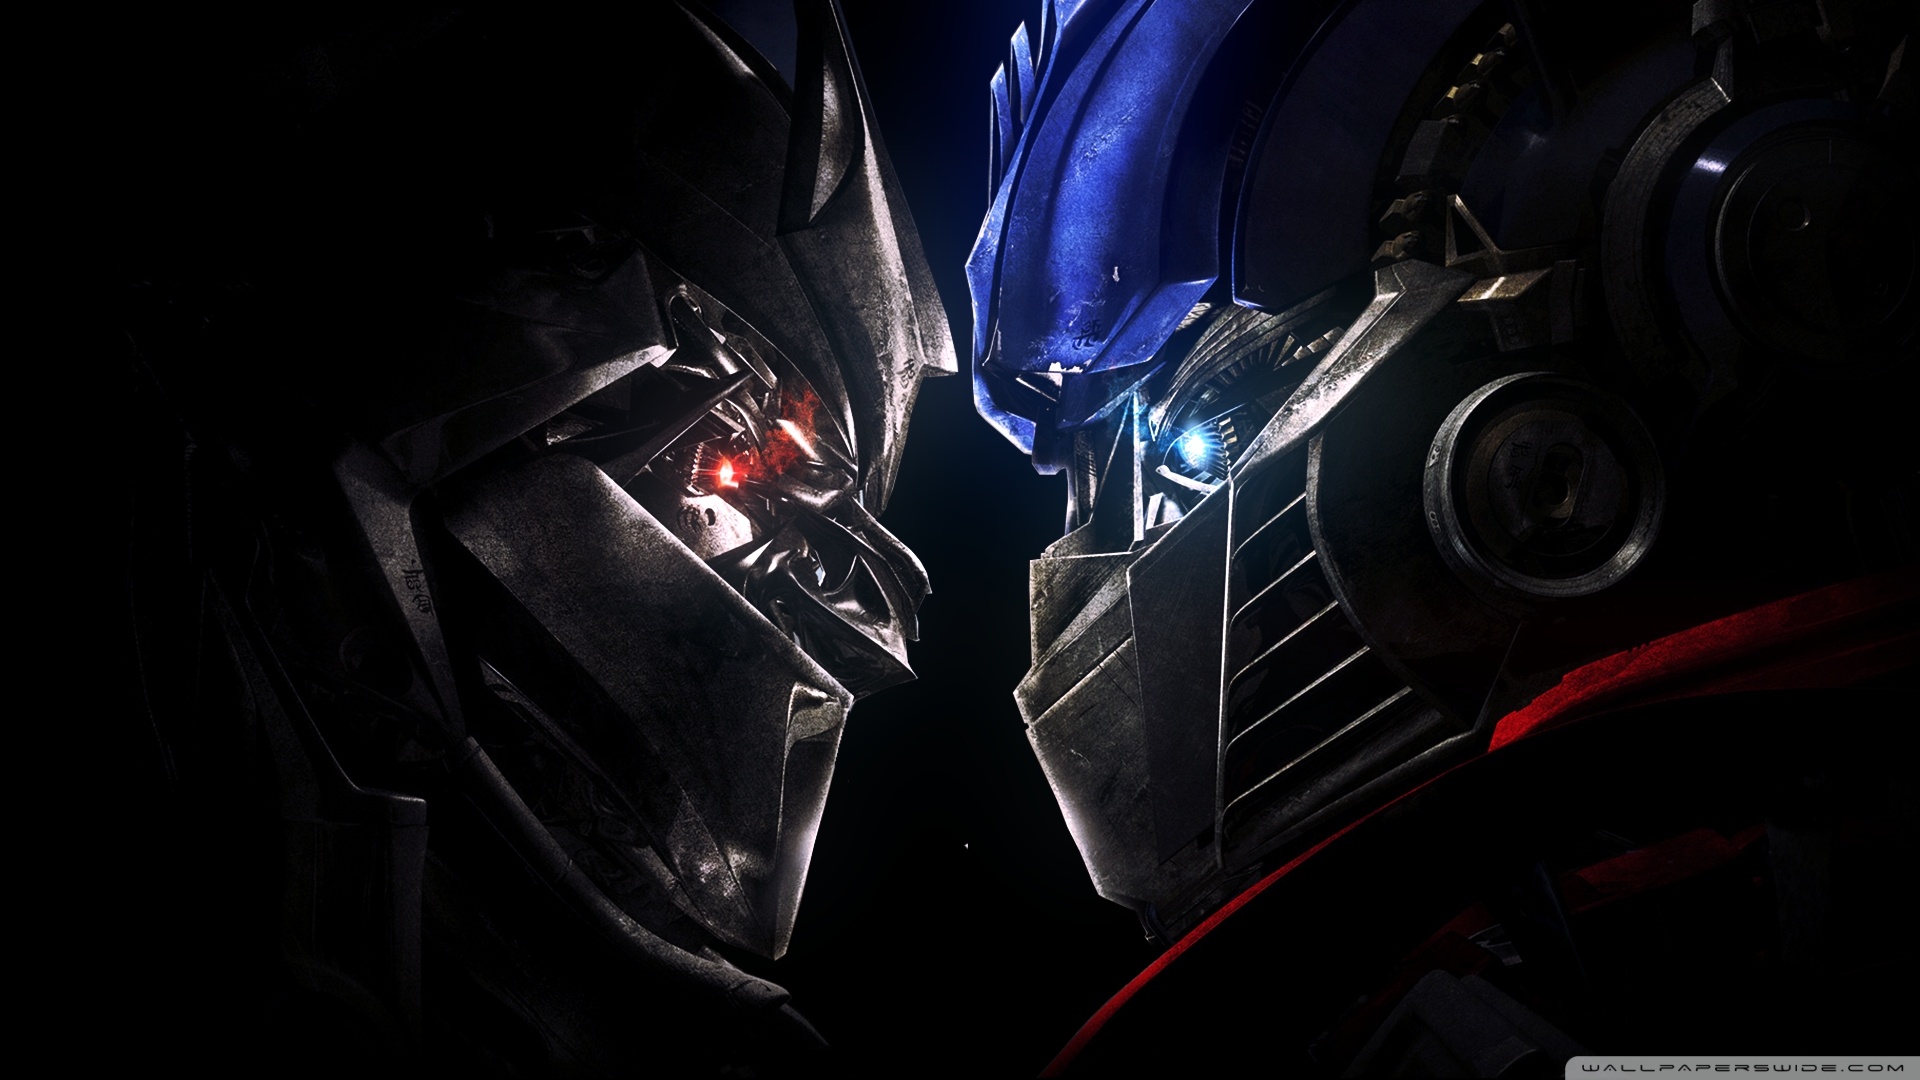 Transformers Cheap Images 3972 Hd Wallpapers | ibwall.com